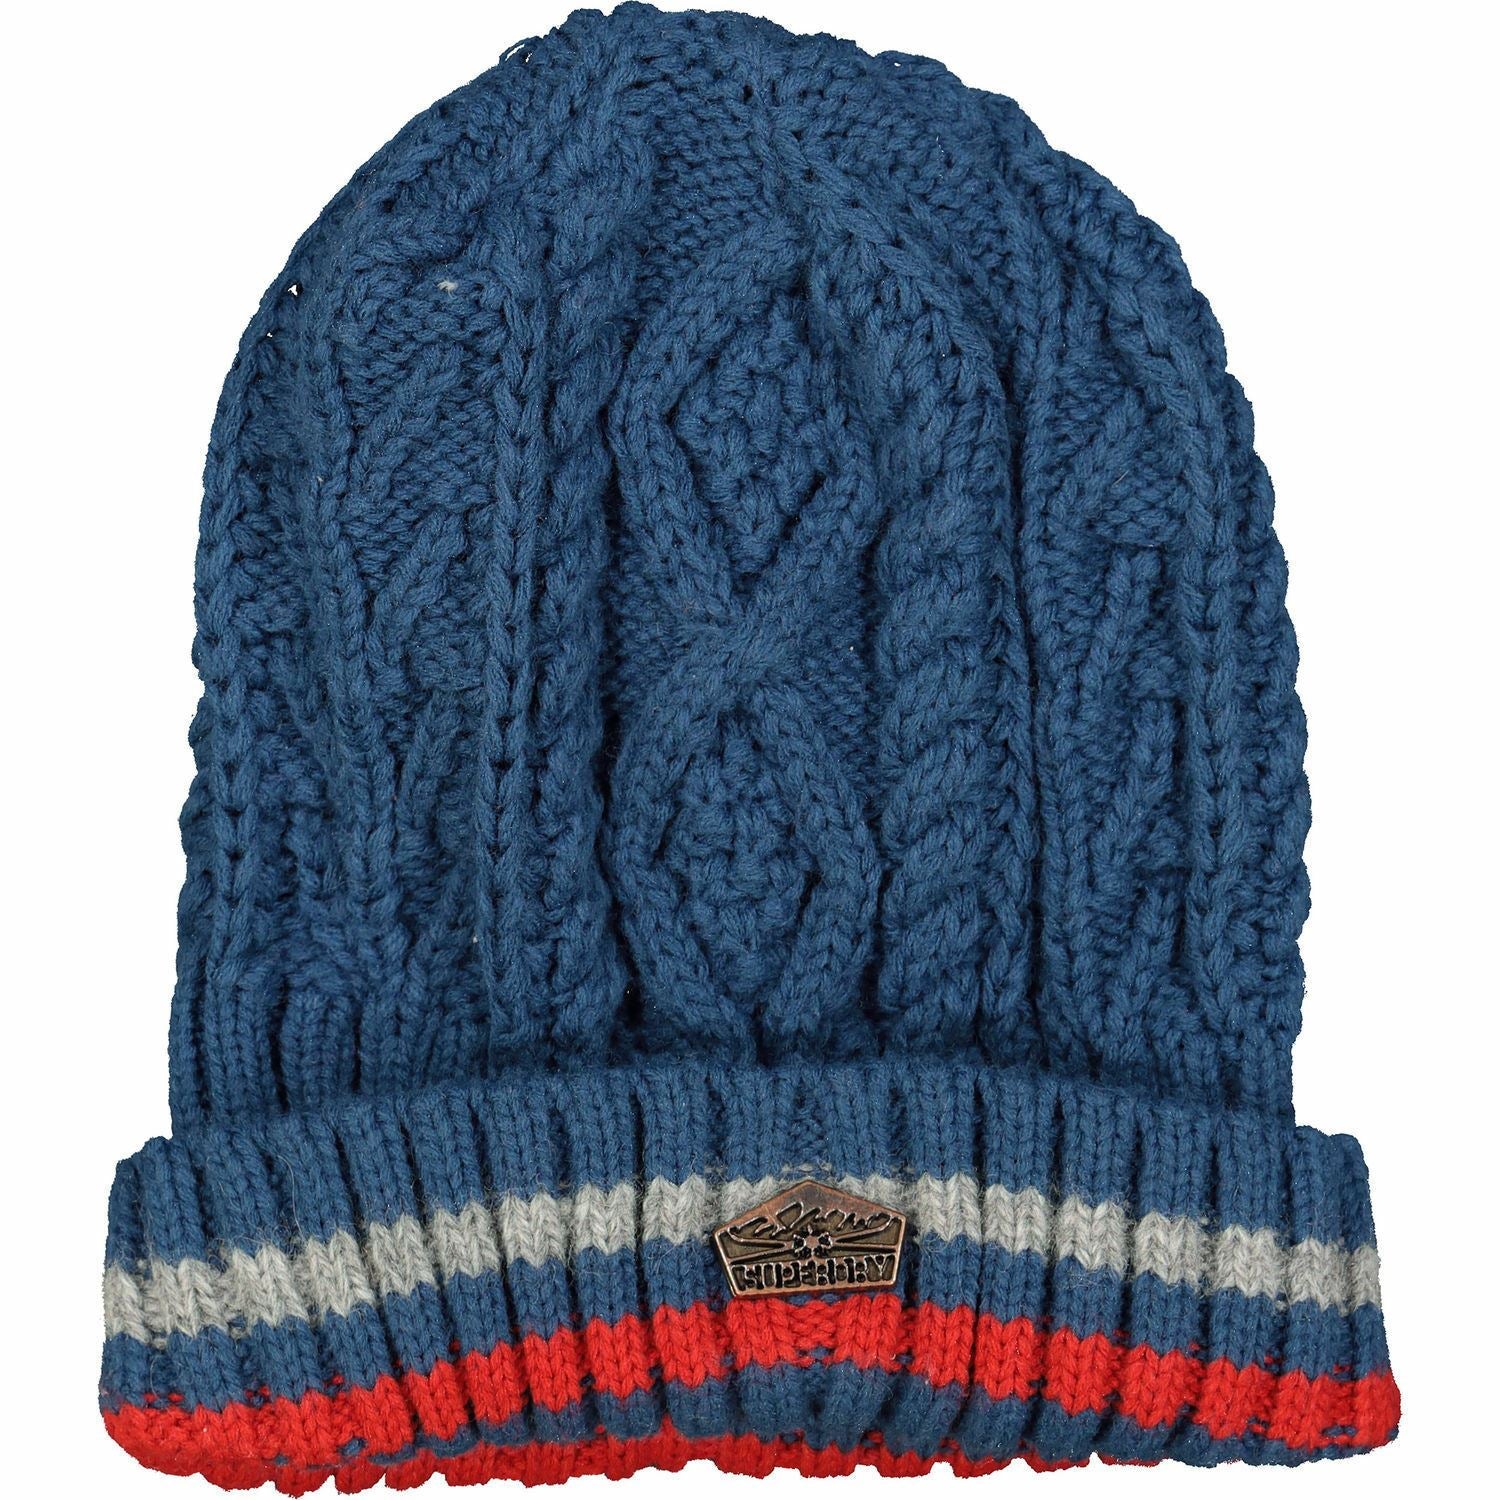 Men's SUPERDRY TRI COLOUR CABLE Knitted Hat, Slalom Blue, One Size